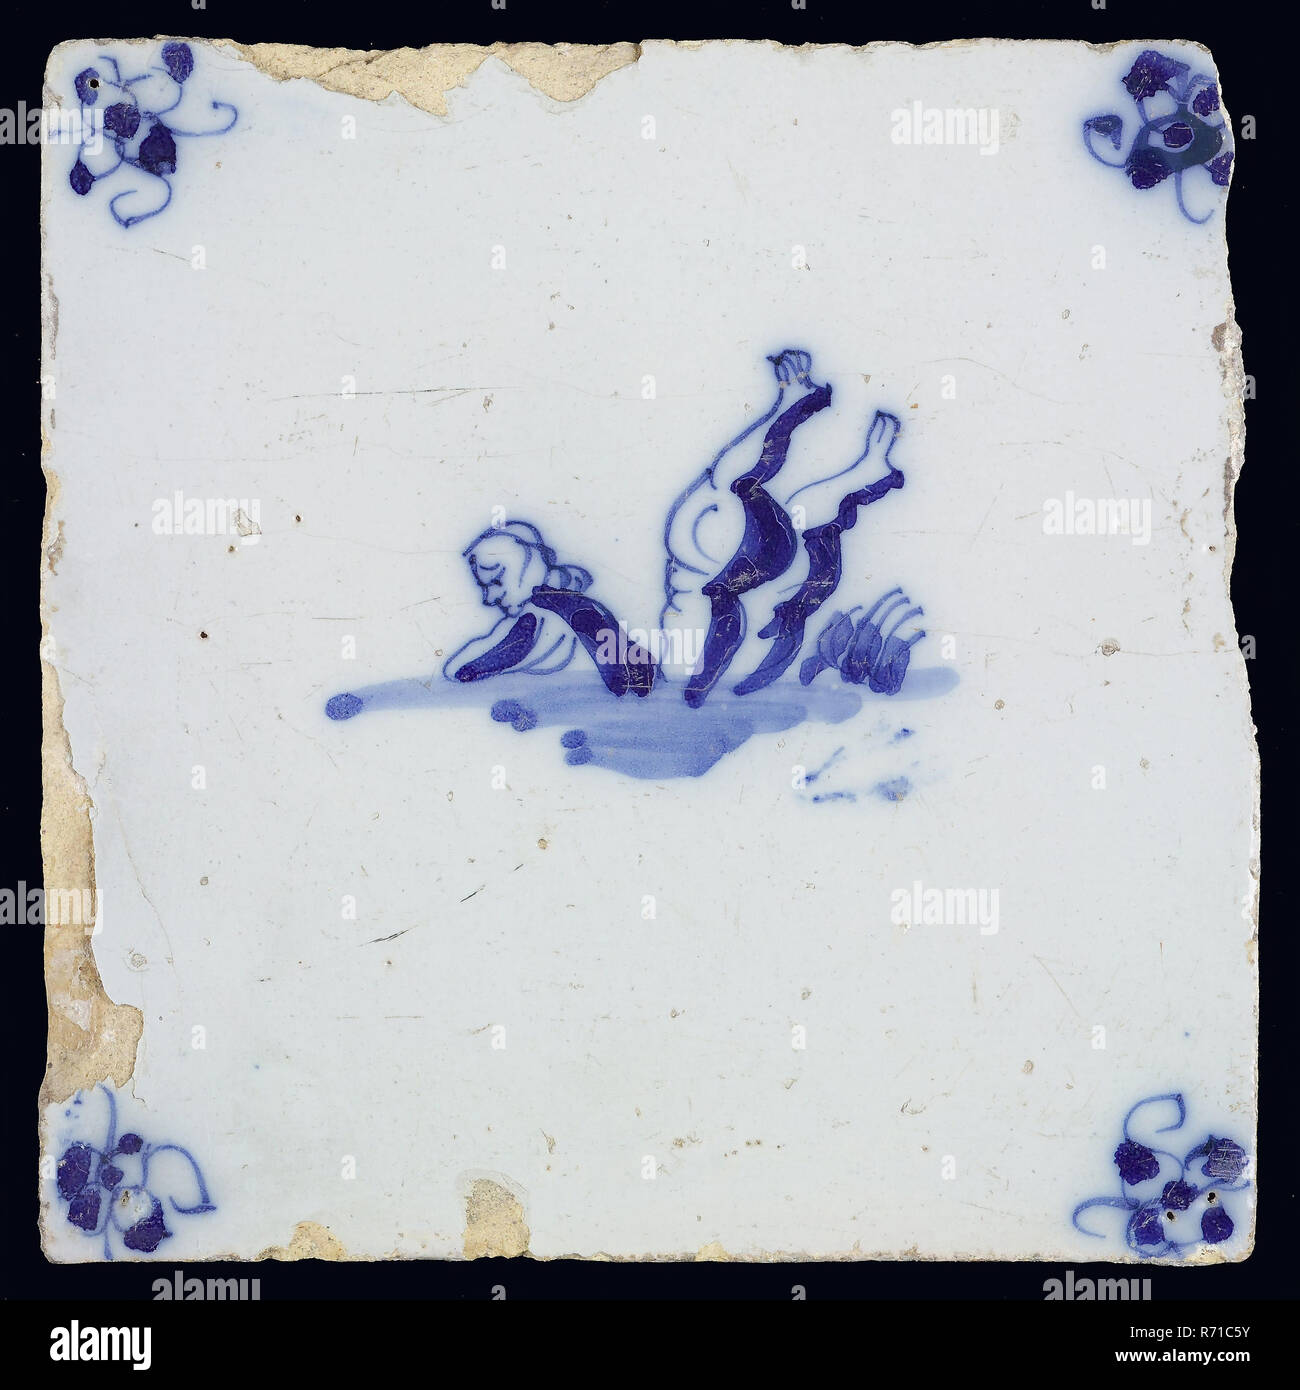 Sea creature tile, in blue on white, upper body of man and two legs upside down in water, corner pattern spider, wall tile tile sculpture ceramic earthenware glaze, baked 2x glazed painted Stock Photo